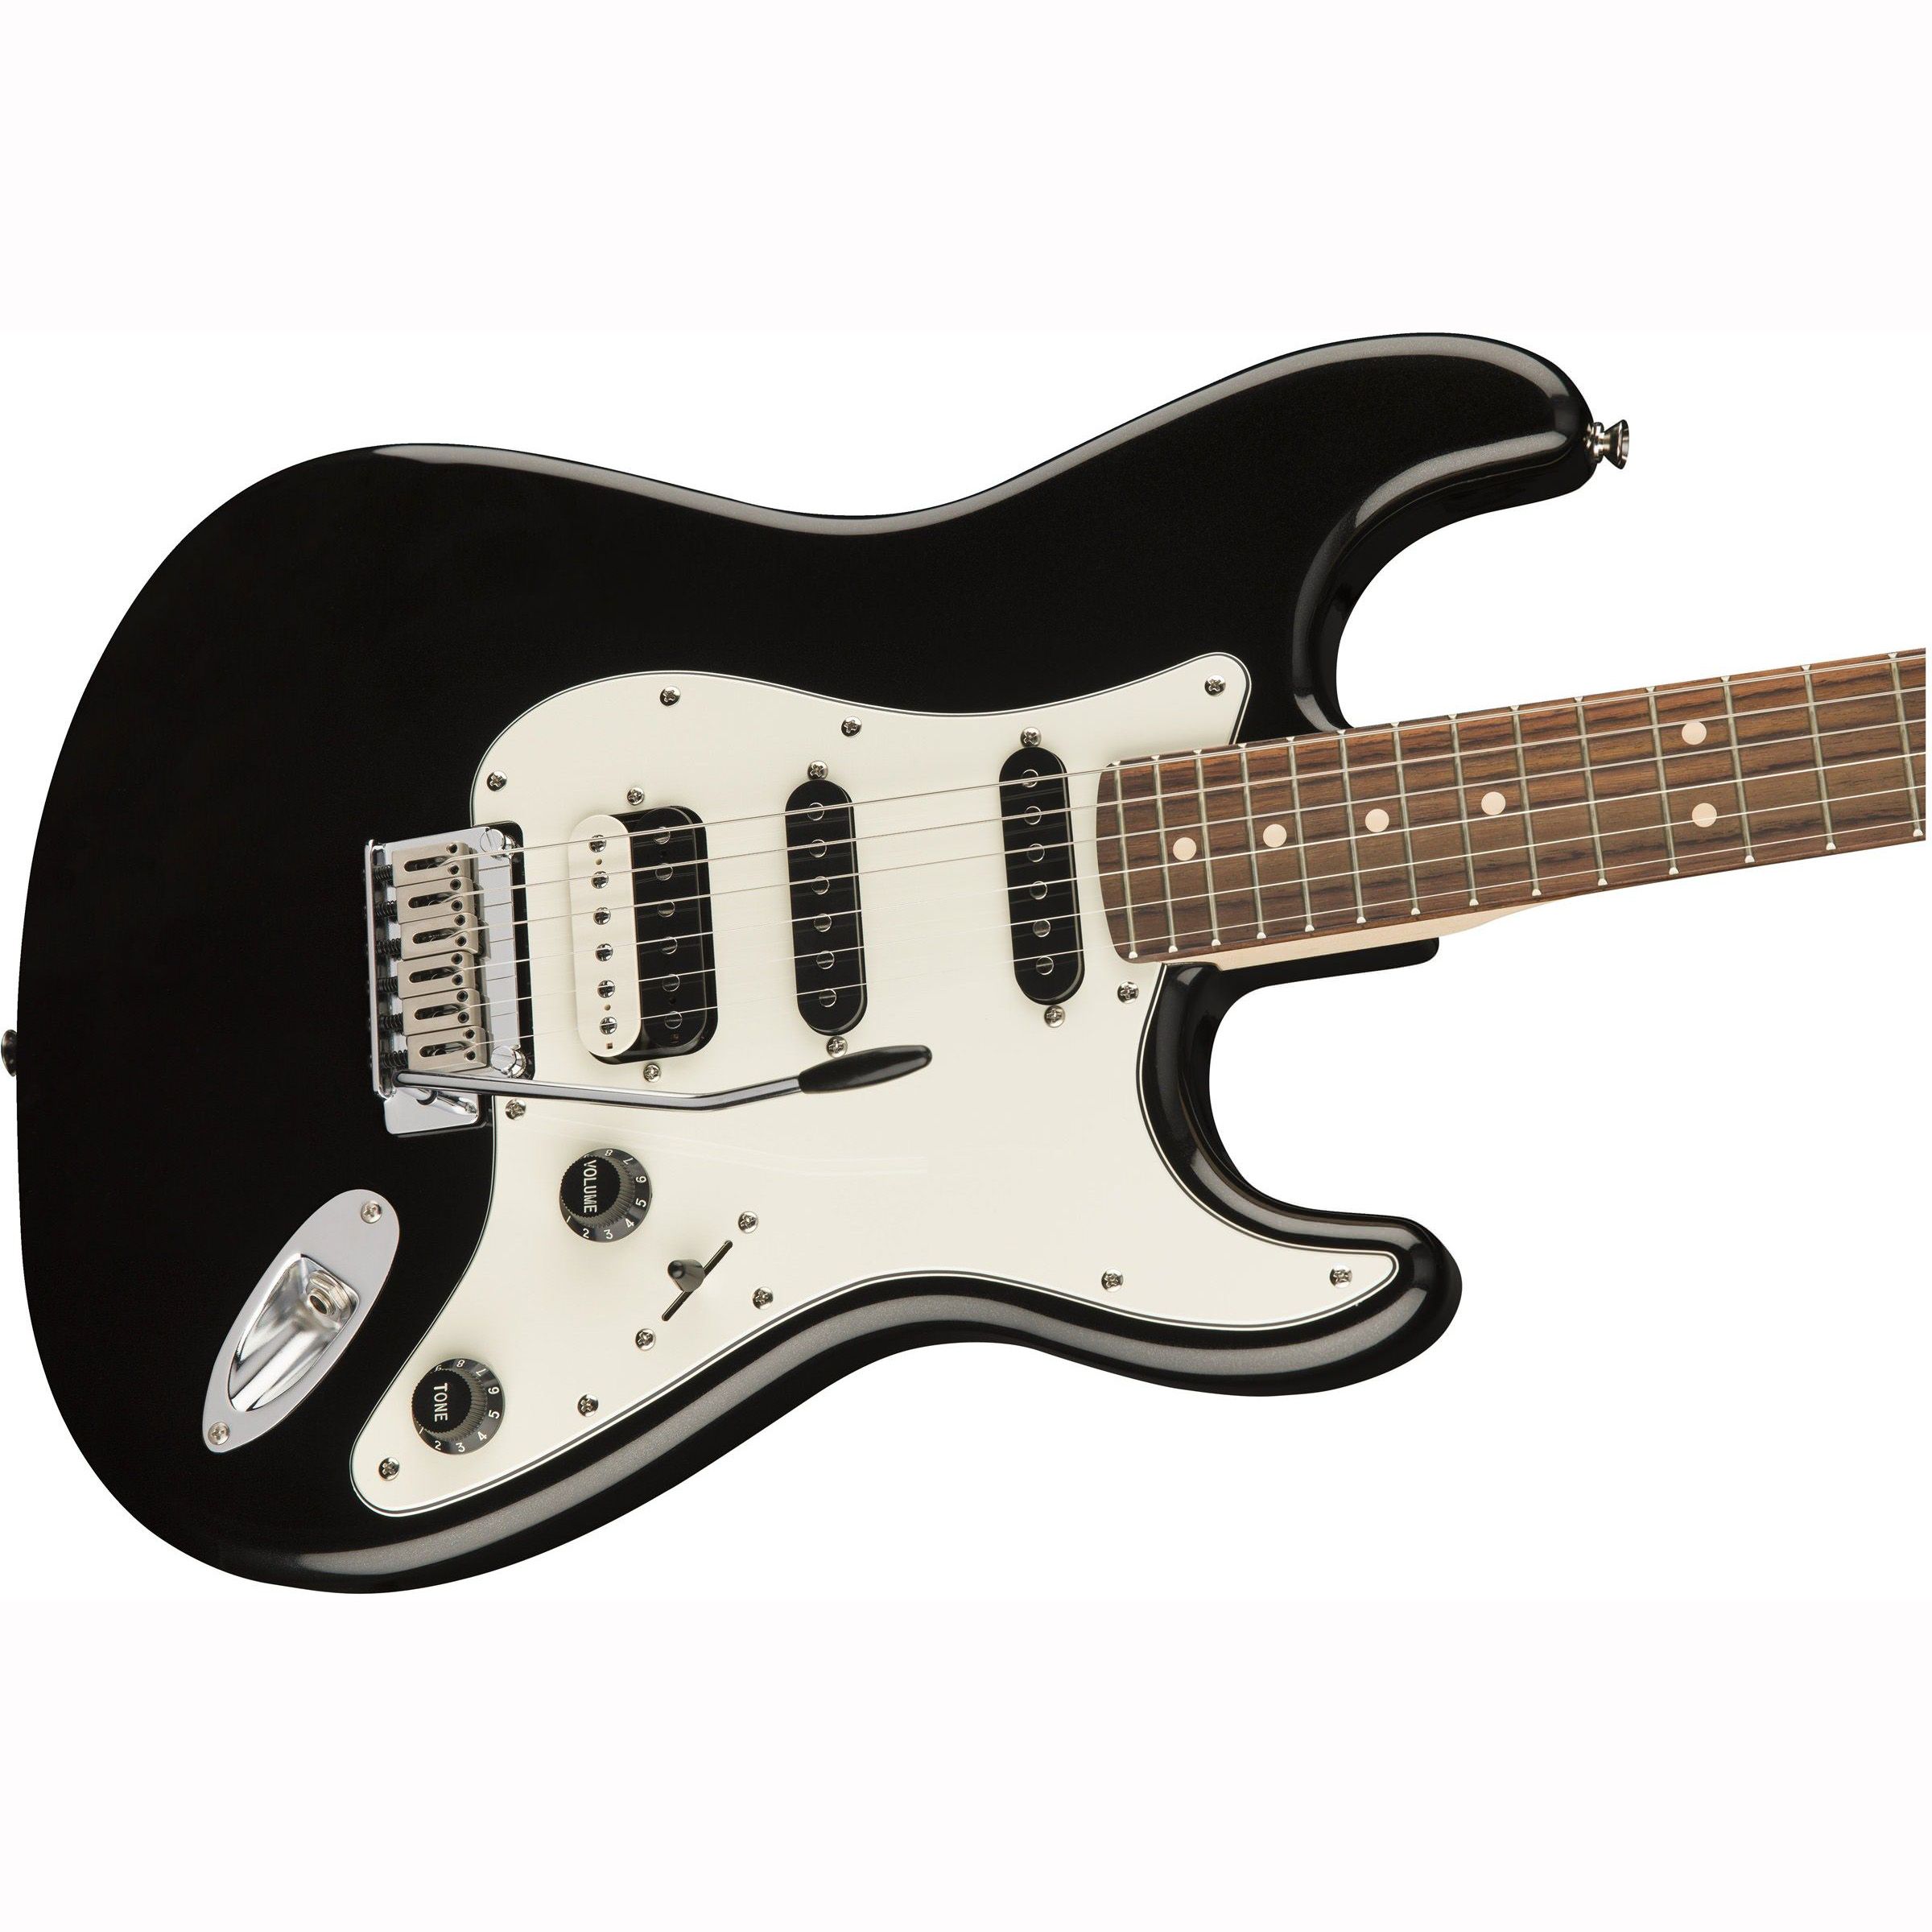 Squier stratocaster hss. Электрогитара Fender American professional Stratocaster. Электрогитара Fender American Elite Stratocaster. Электрогитара Squier Standard Stratocaster. Электрогитара Fender Squier Stratocaster.